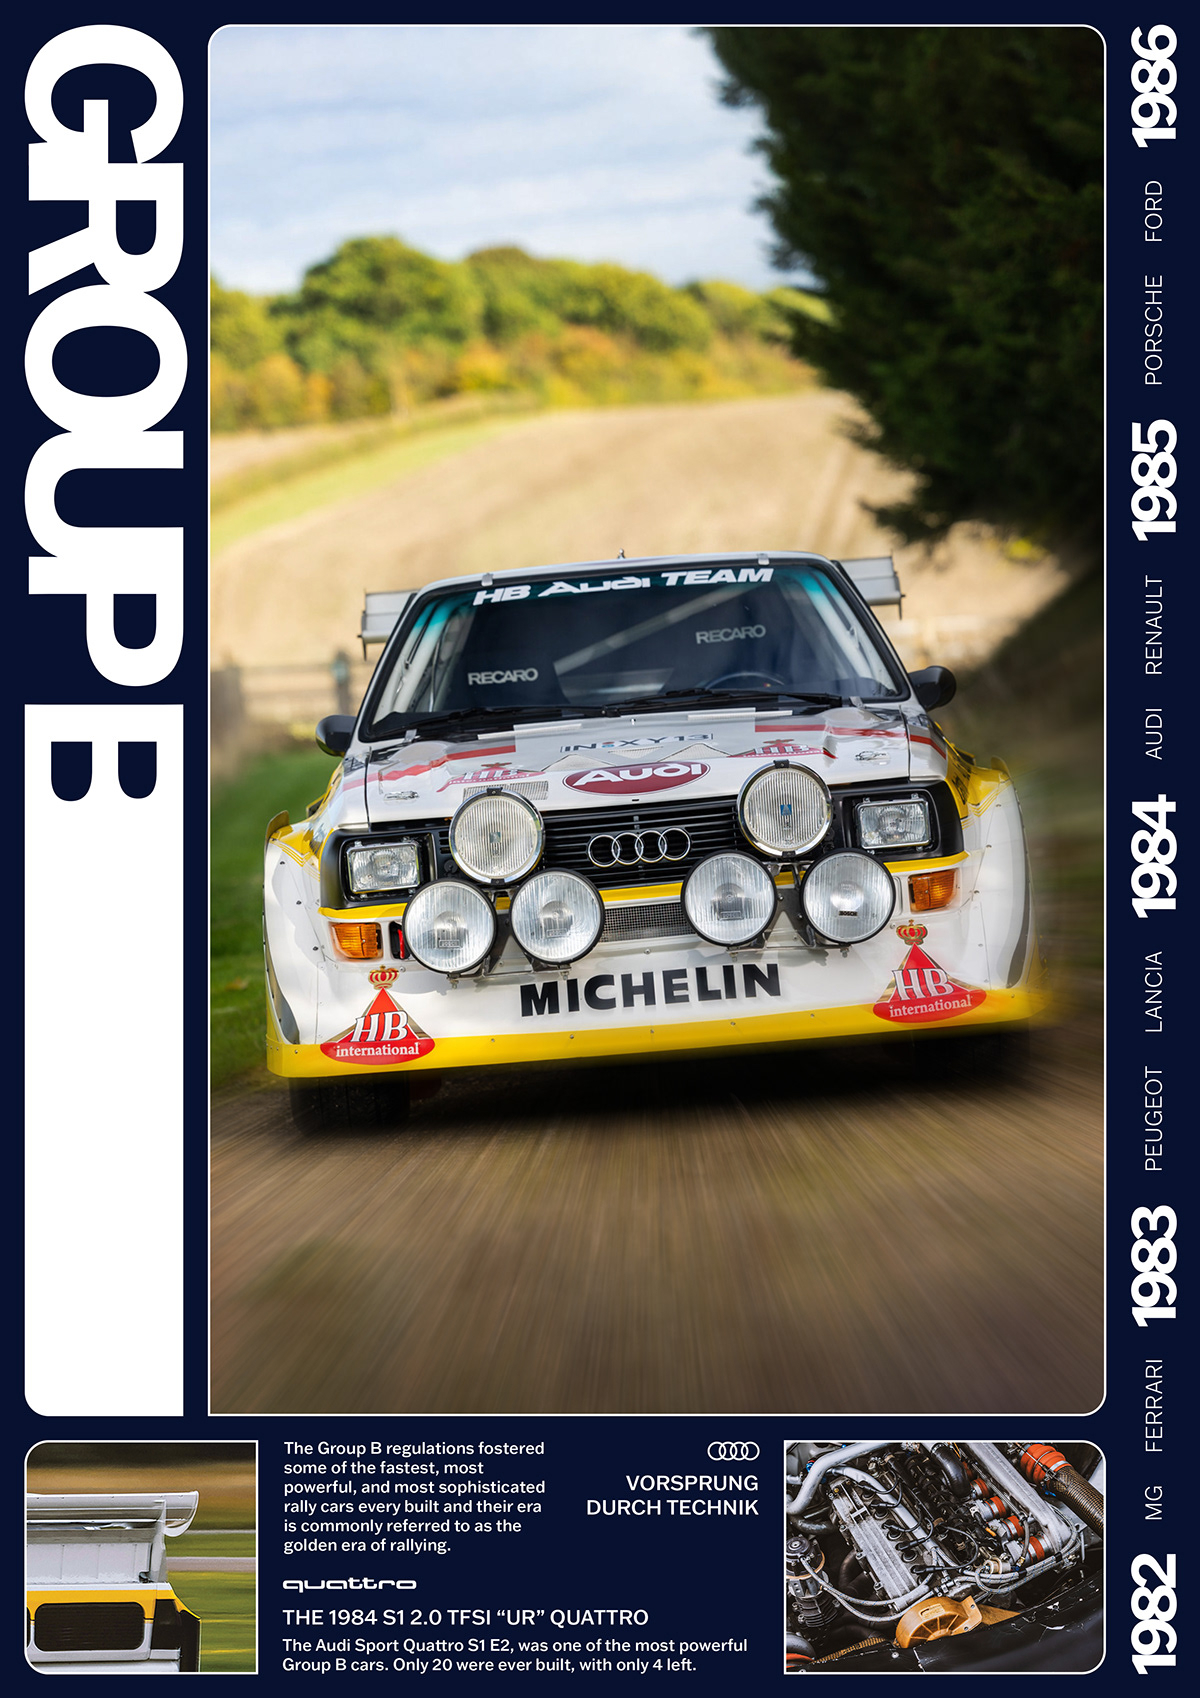 Poster Design Brutalism Minimalism Franklin Gothic Group B Rally Europe Portugal Fisa f1 Audi